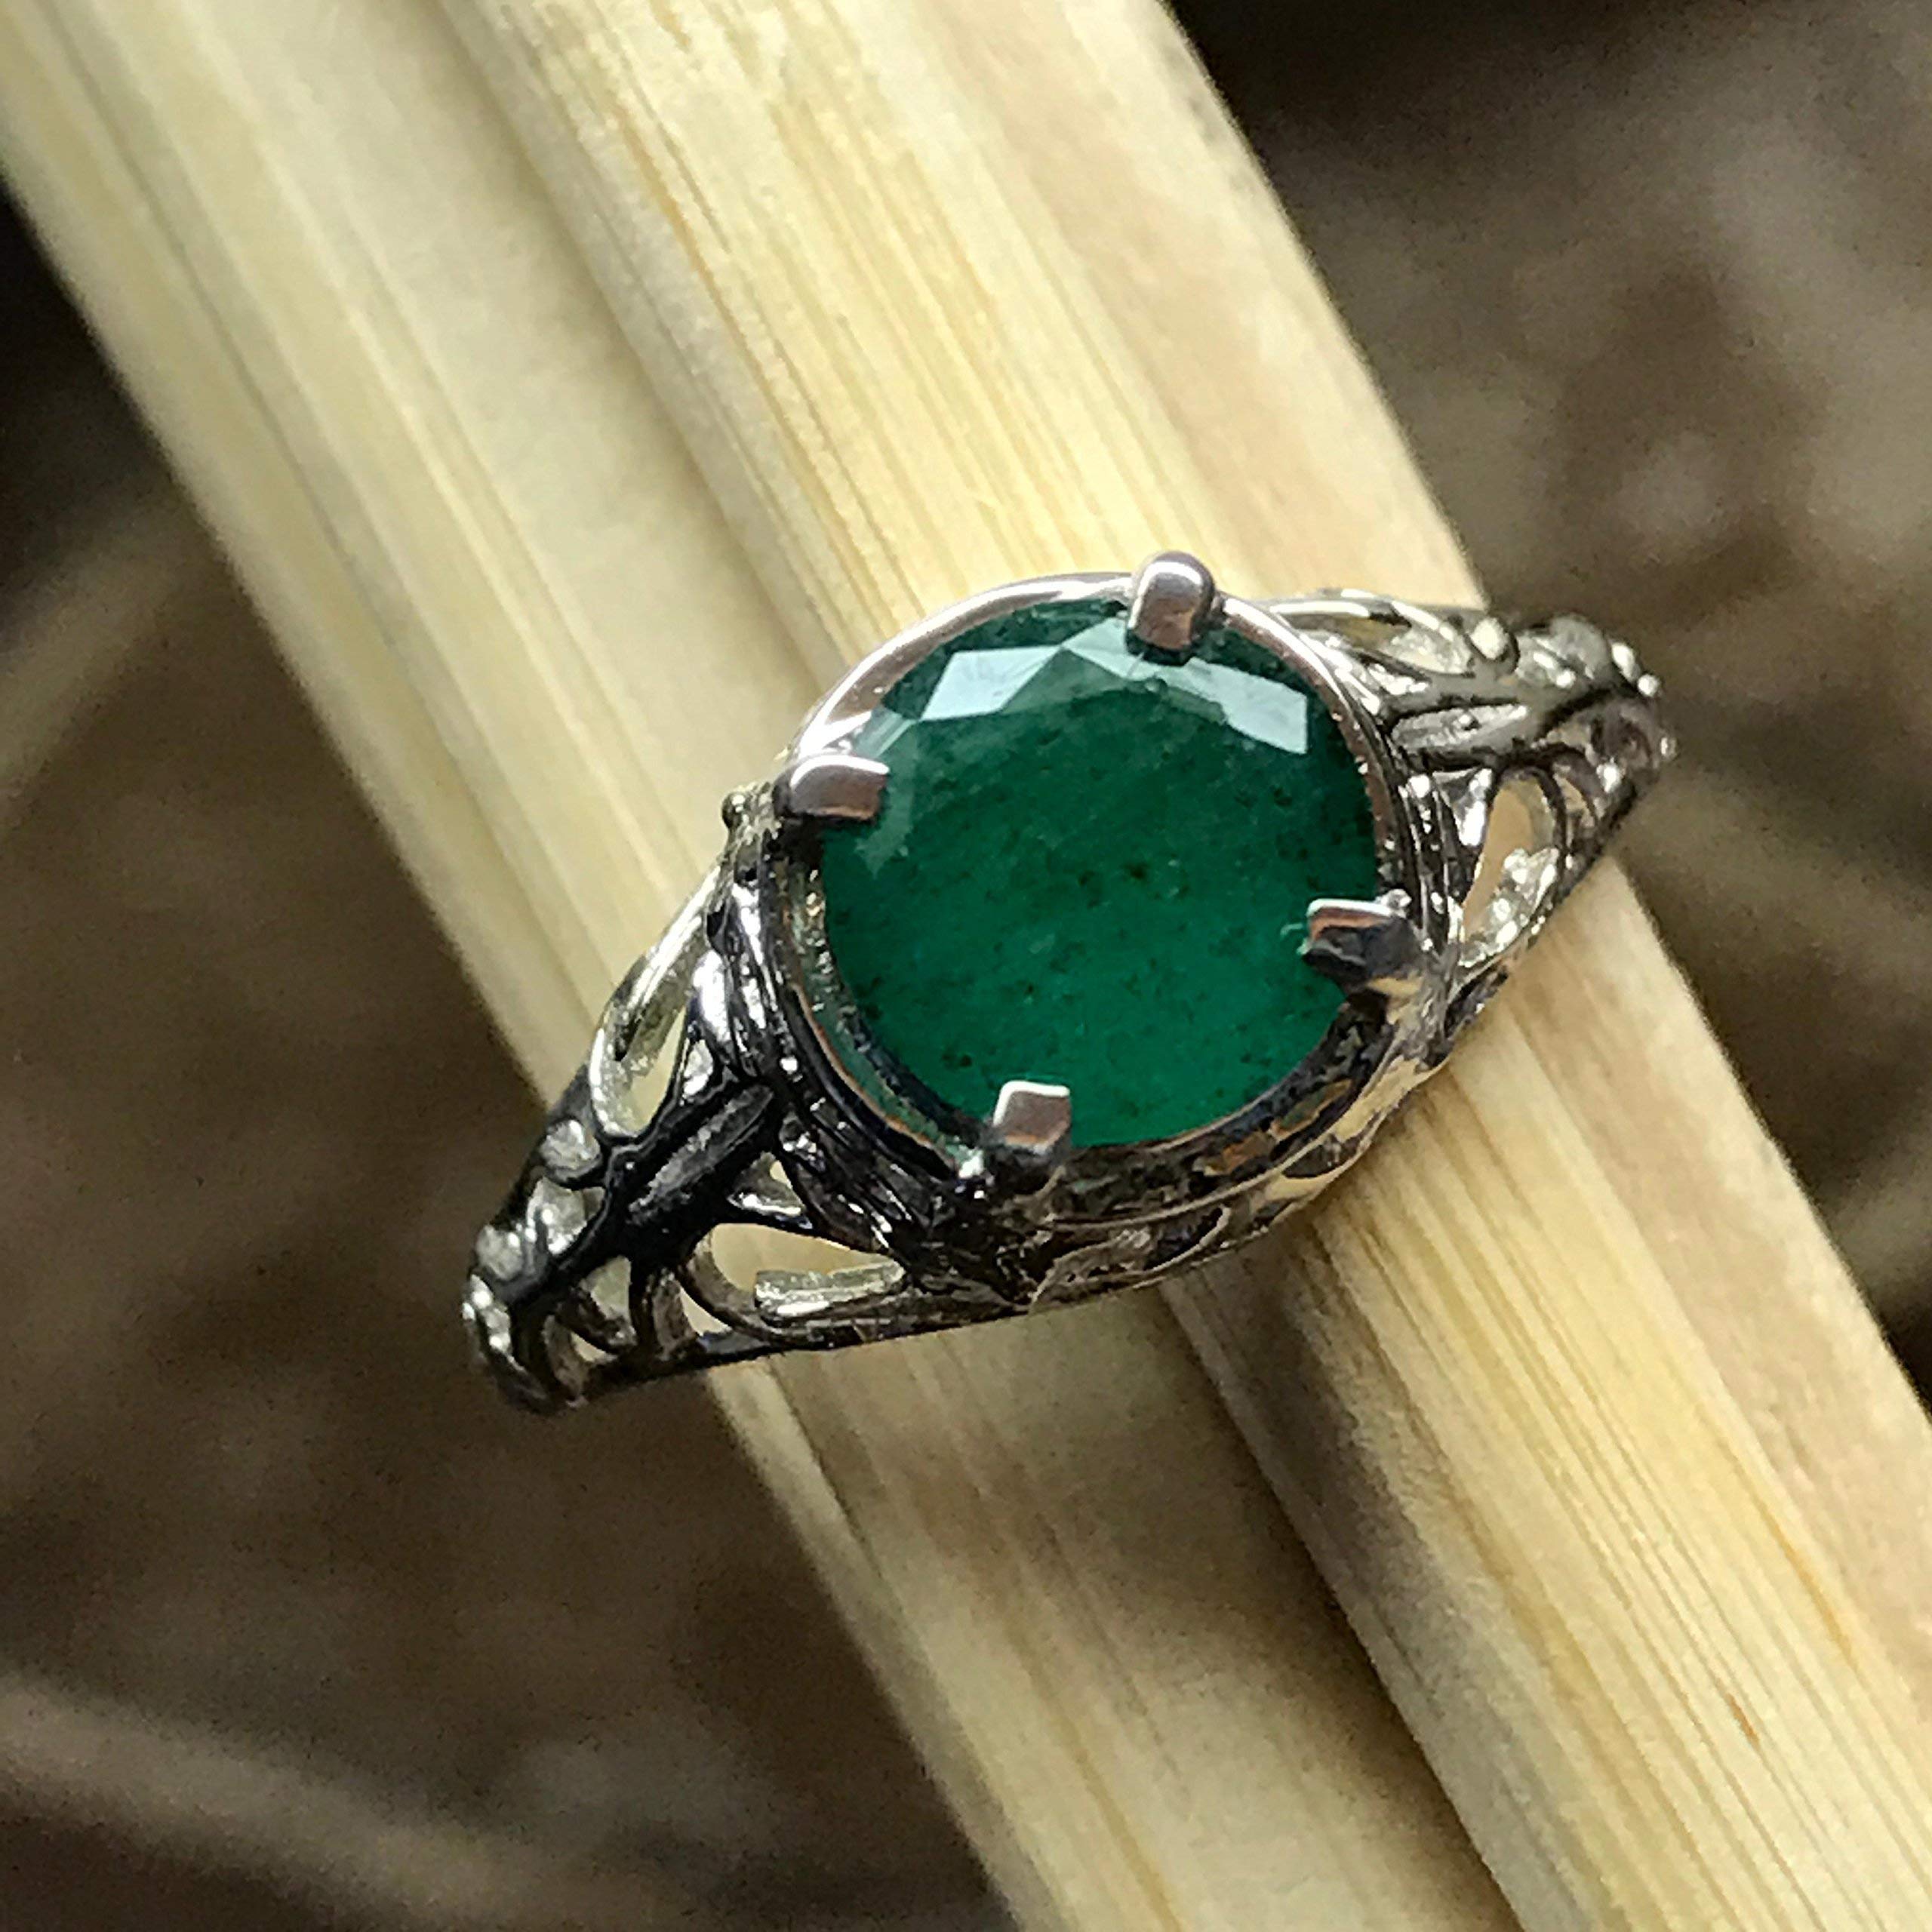 Natural 1ct Green Emerald 925 Solid Sterling Silver Unisex Engagement Ring Size 6, 7, 8 - Natural Rocks by Kala